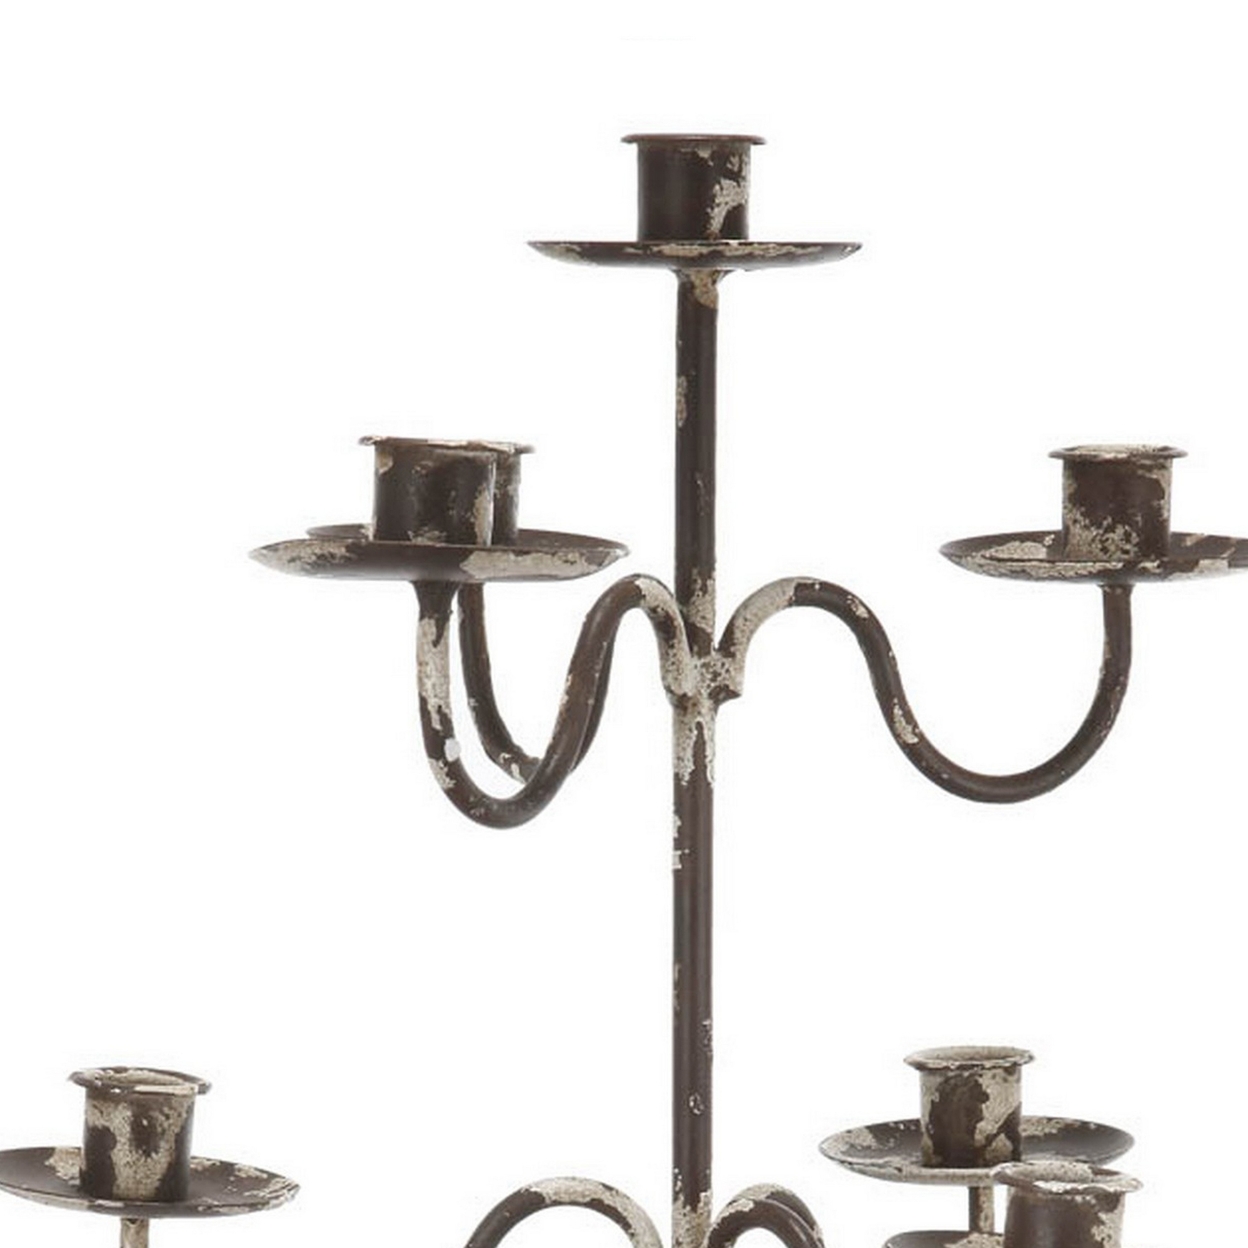 16 Inch Candle Holder With 7 Slots, Candelabra Style Distressed Brown Metal- Saltoro Sherpi